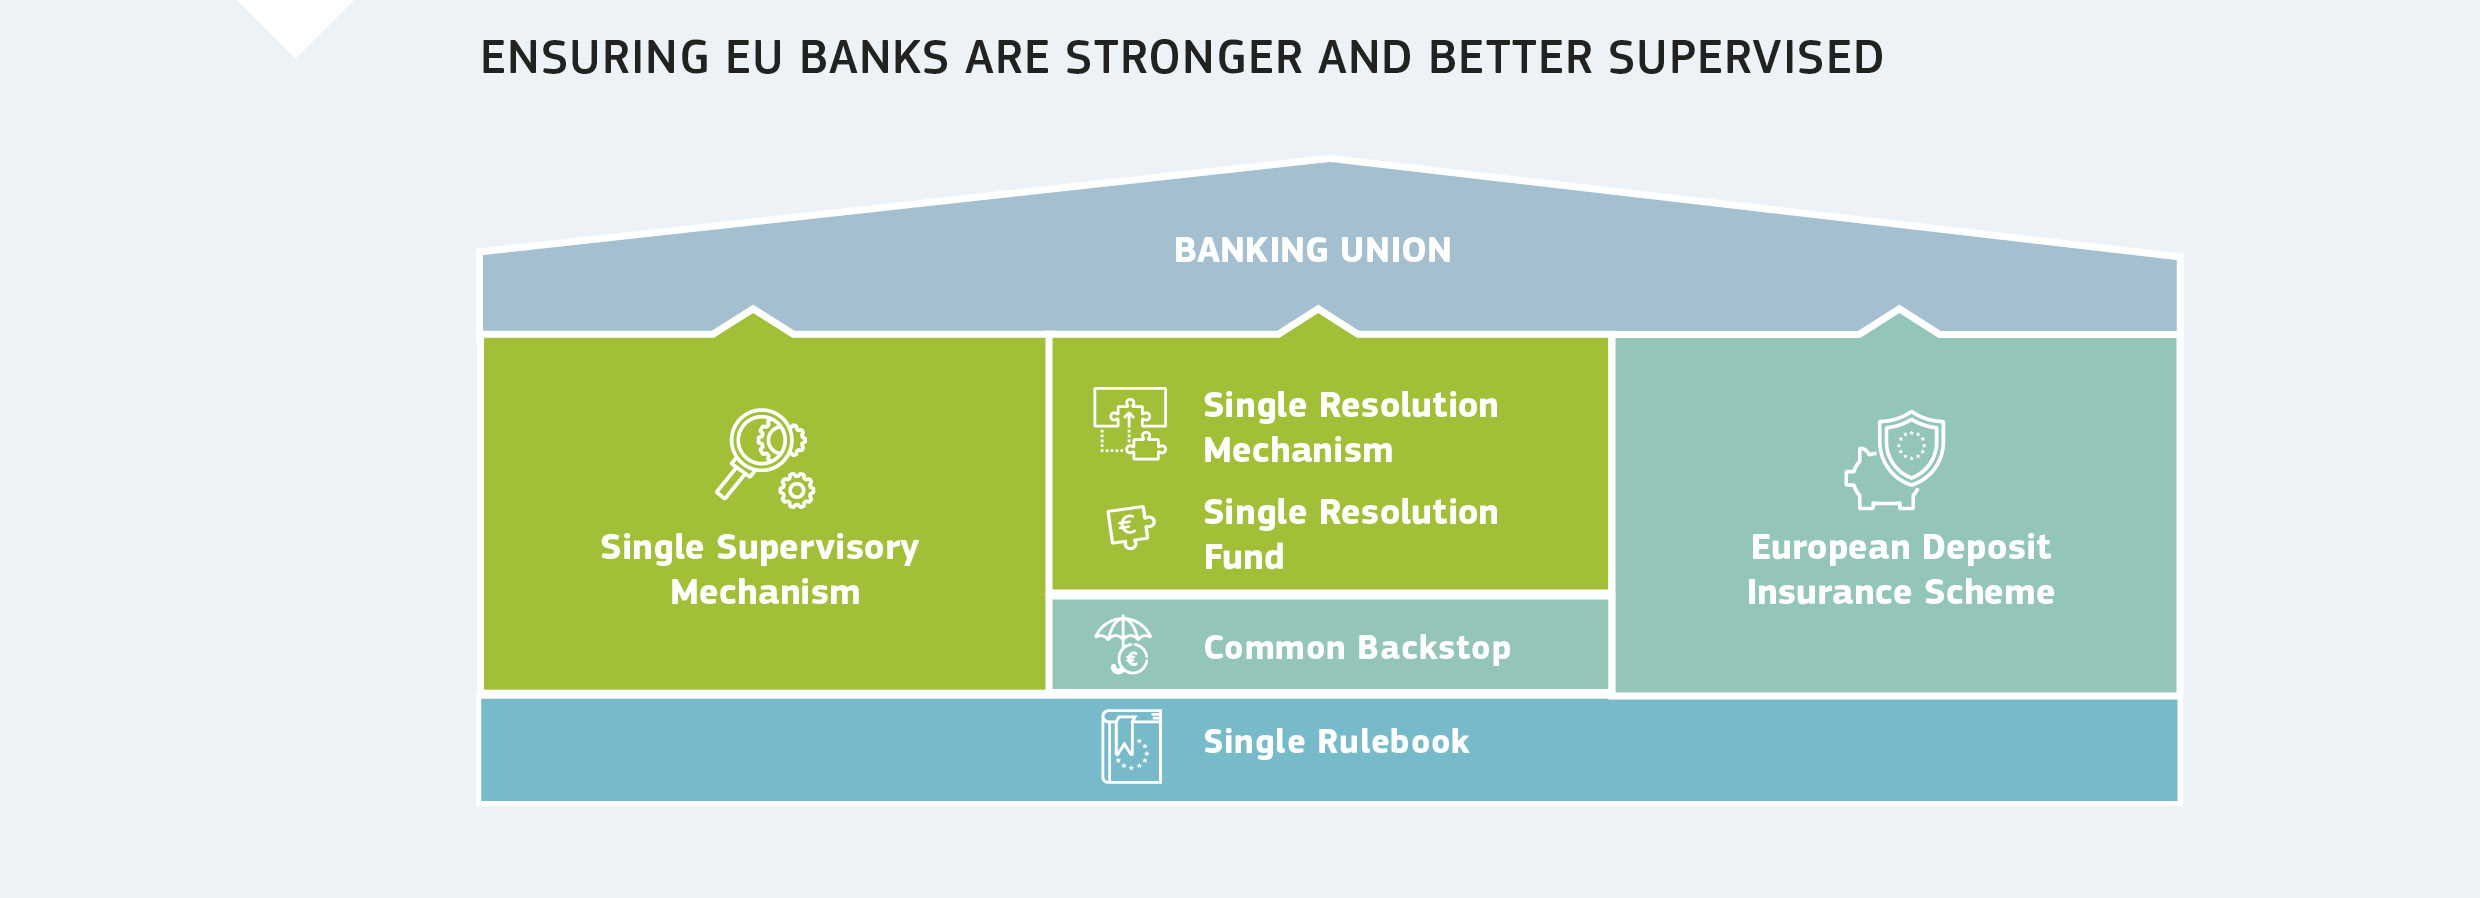 ENSURING EU BANKS ARE STRONGER AND BETTER SUPERVISED